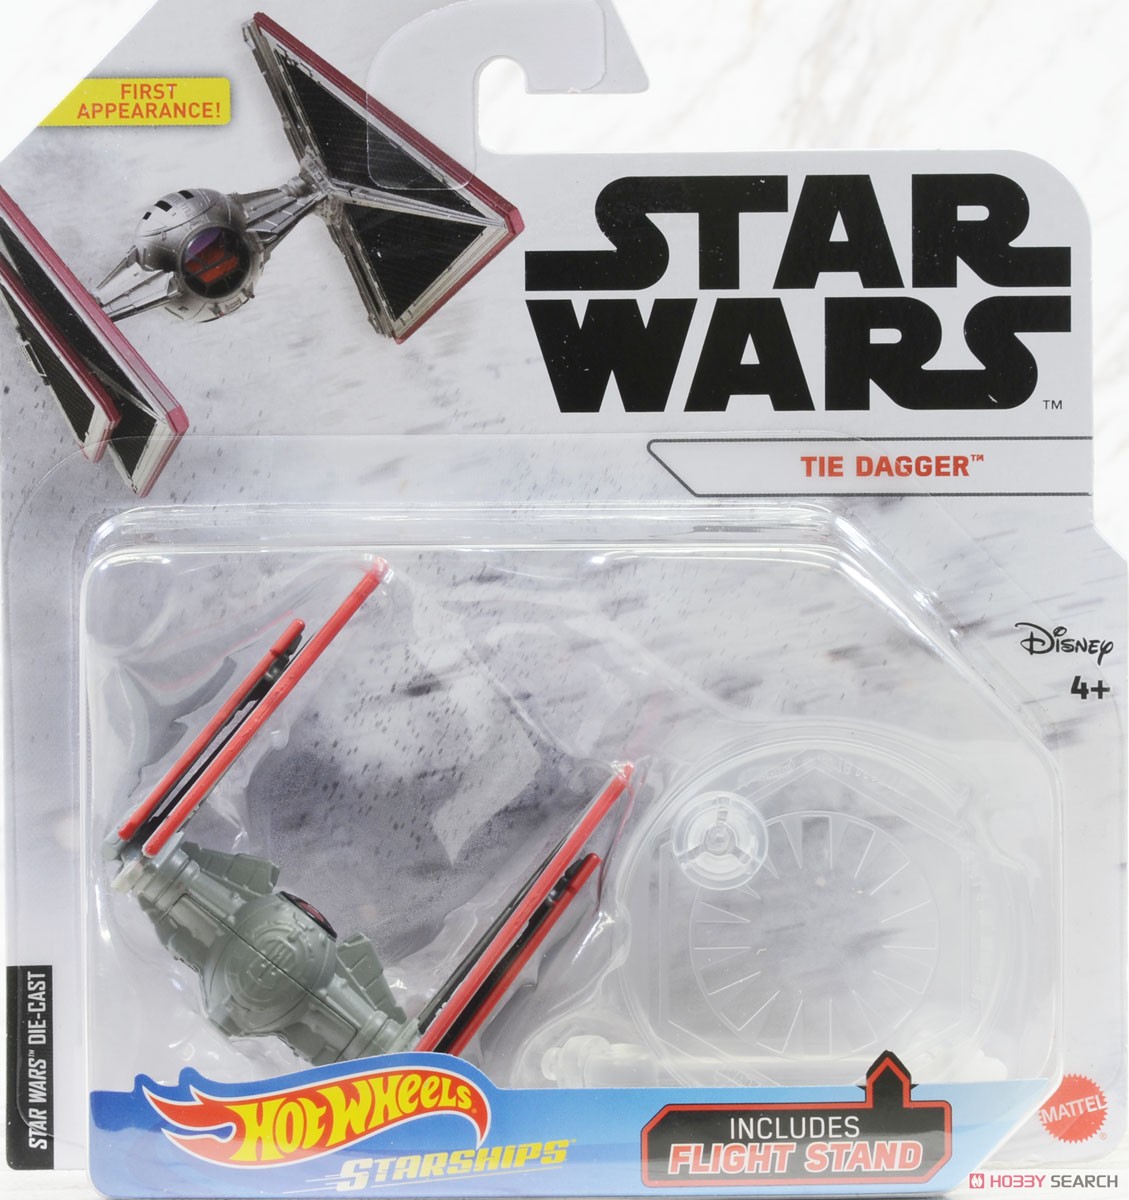 Hot Wheels Star Wars Starship Assort FYT65-986G (set of 6) (Toy) Package4